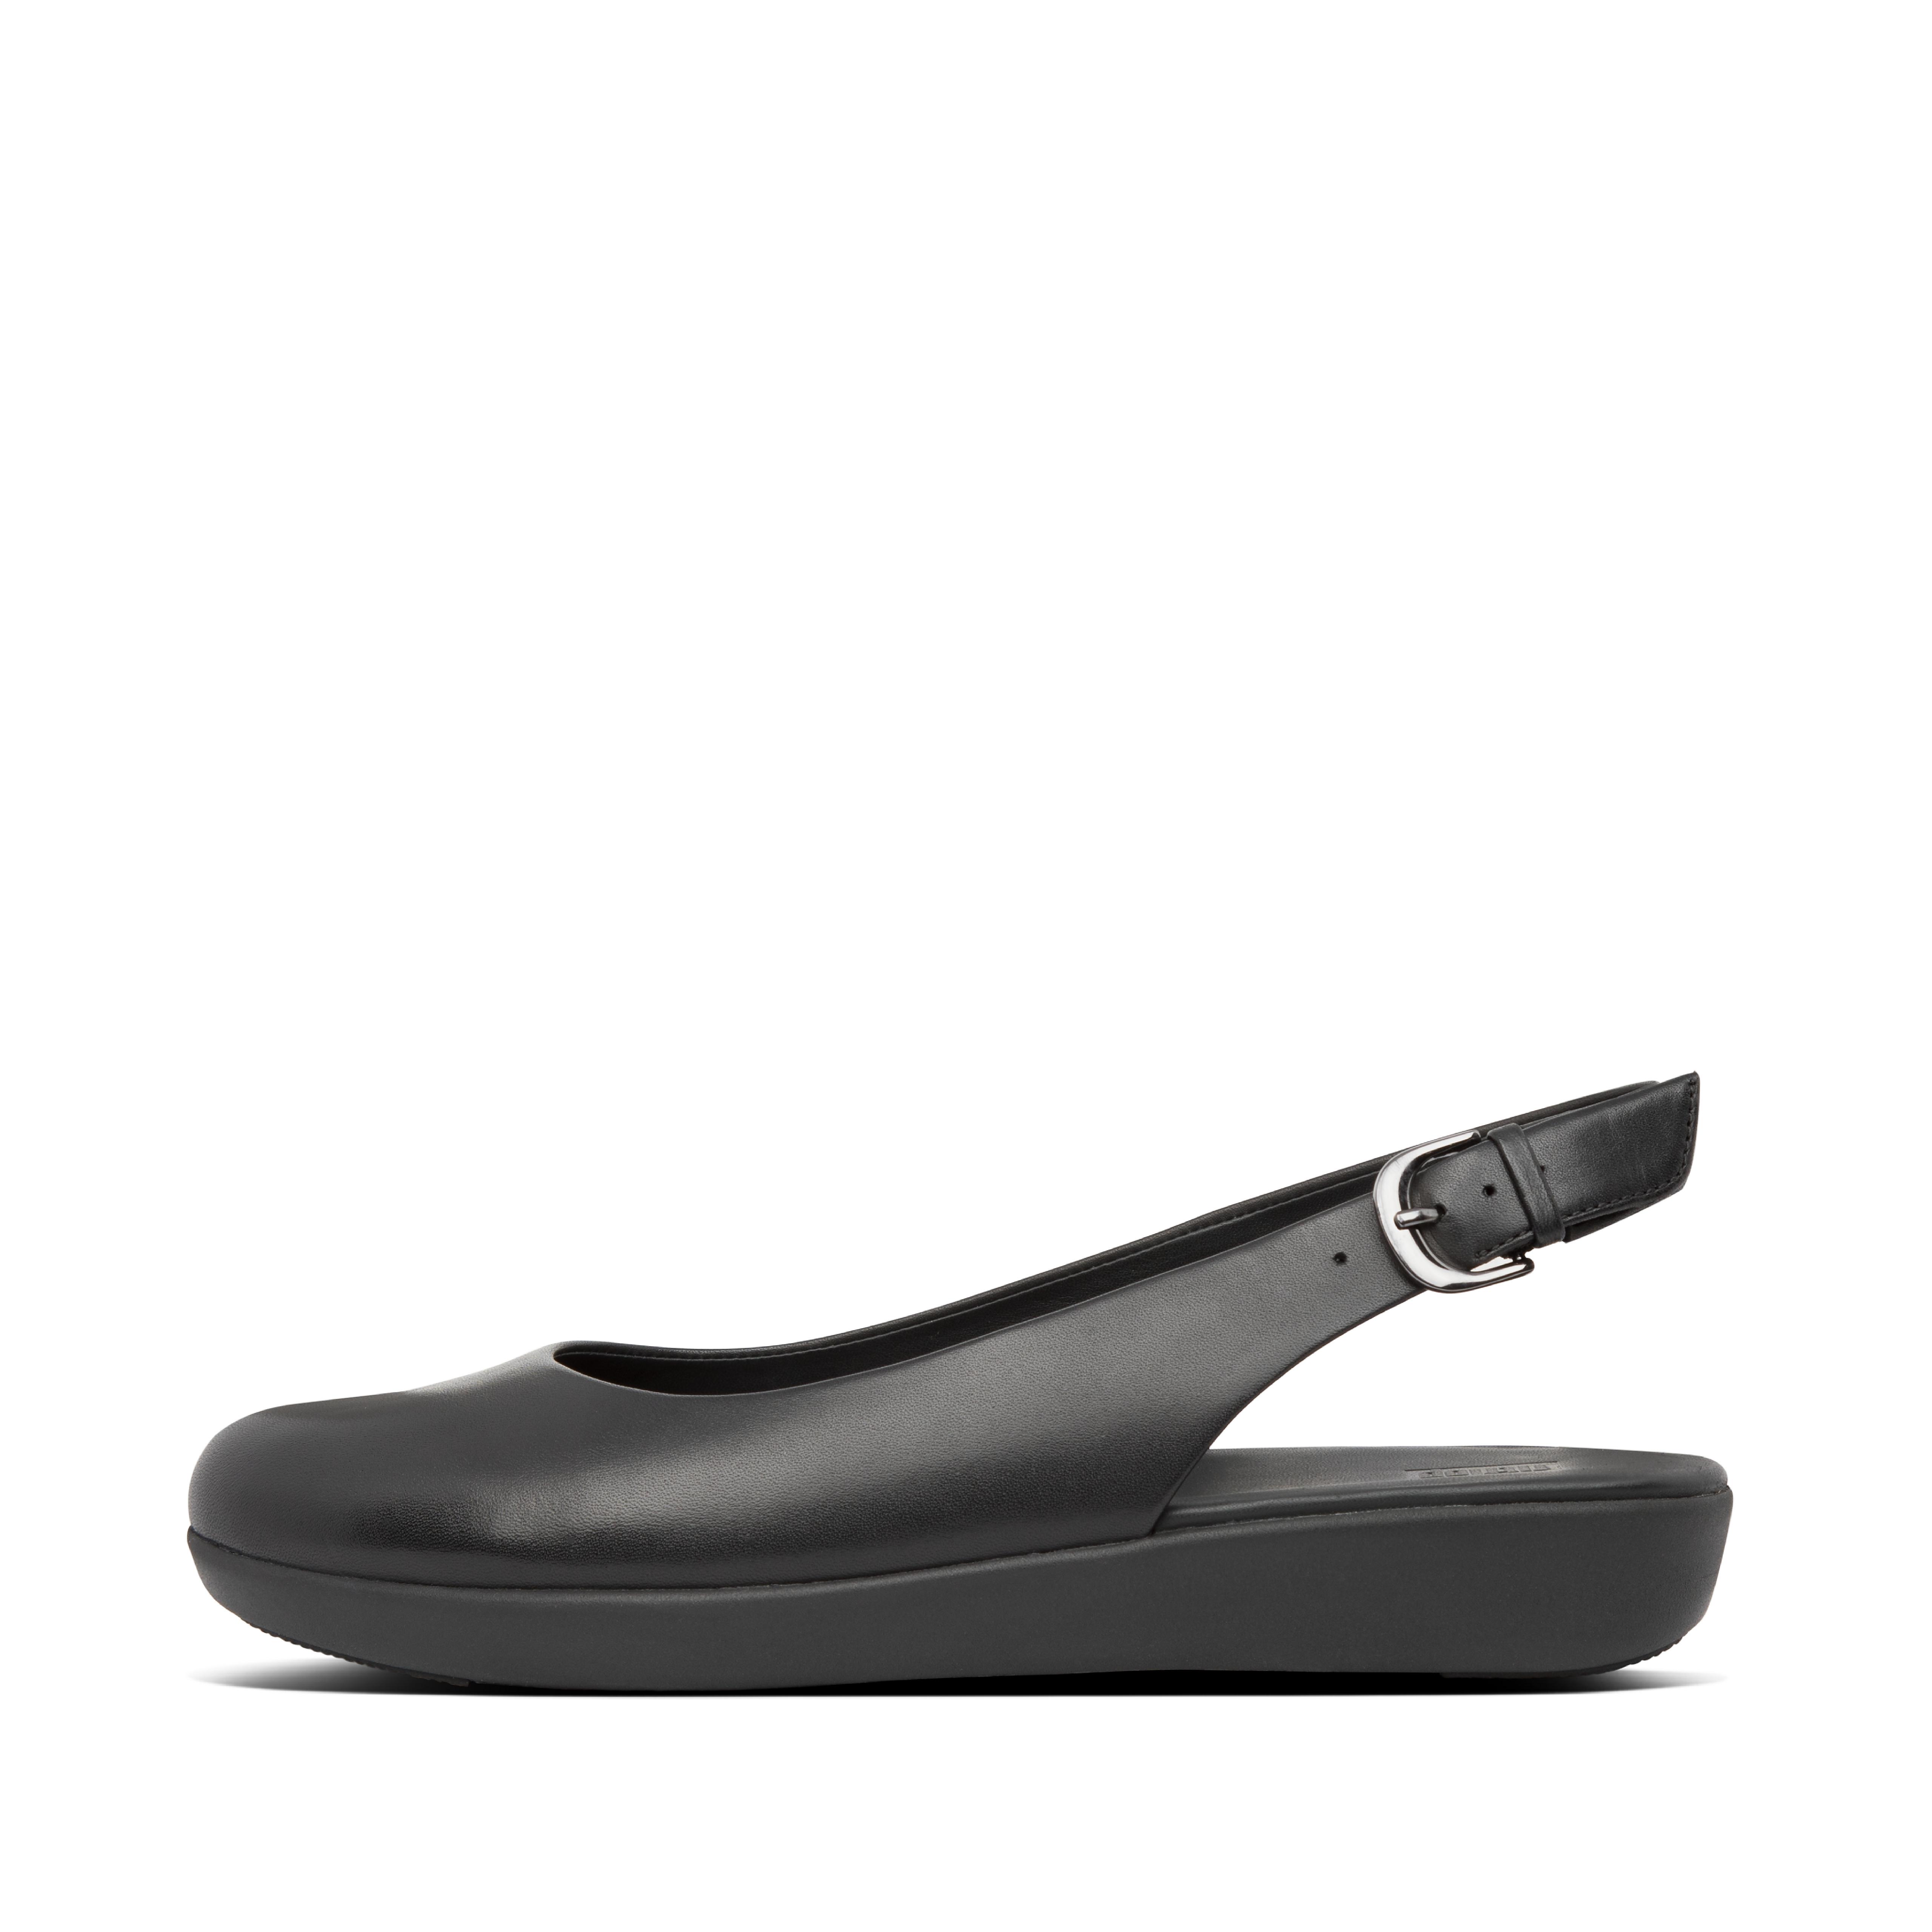 fitflop closed shoes